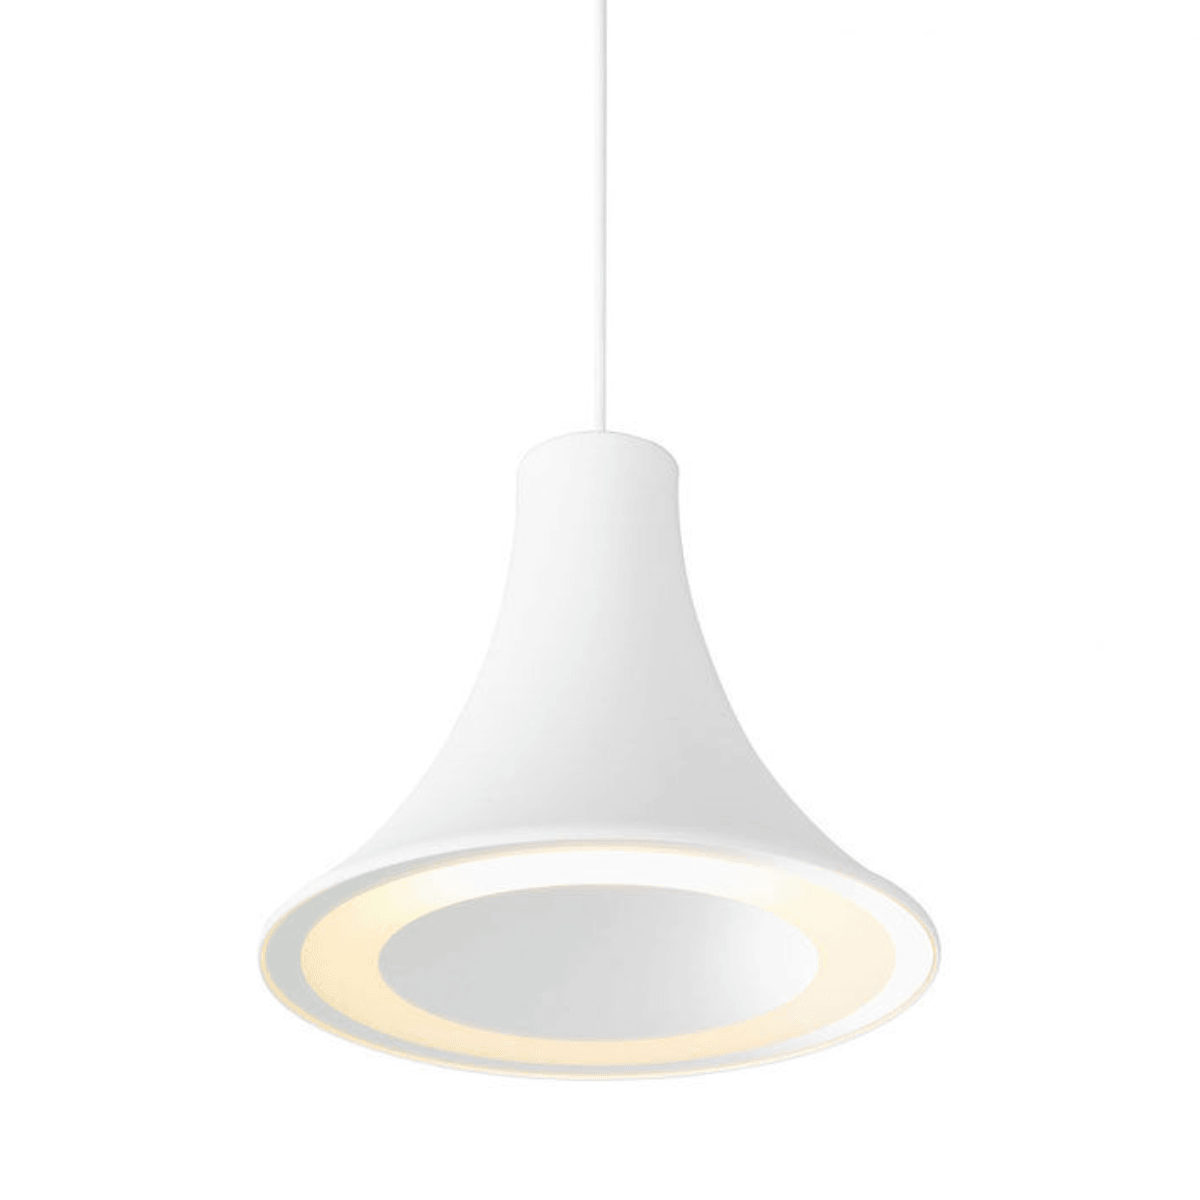 SIRENS FROSTED GLASS - Pendant Light - Luminesy